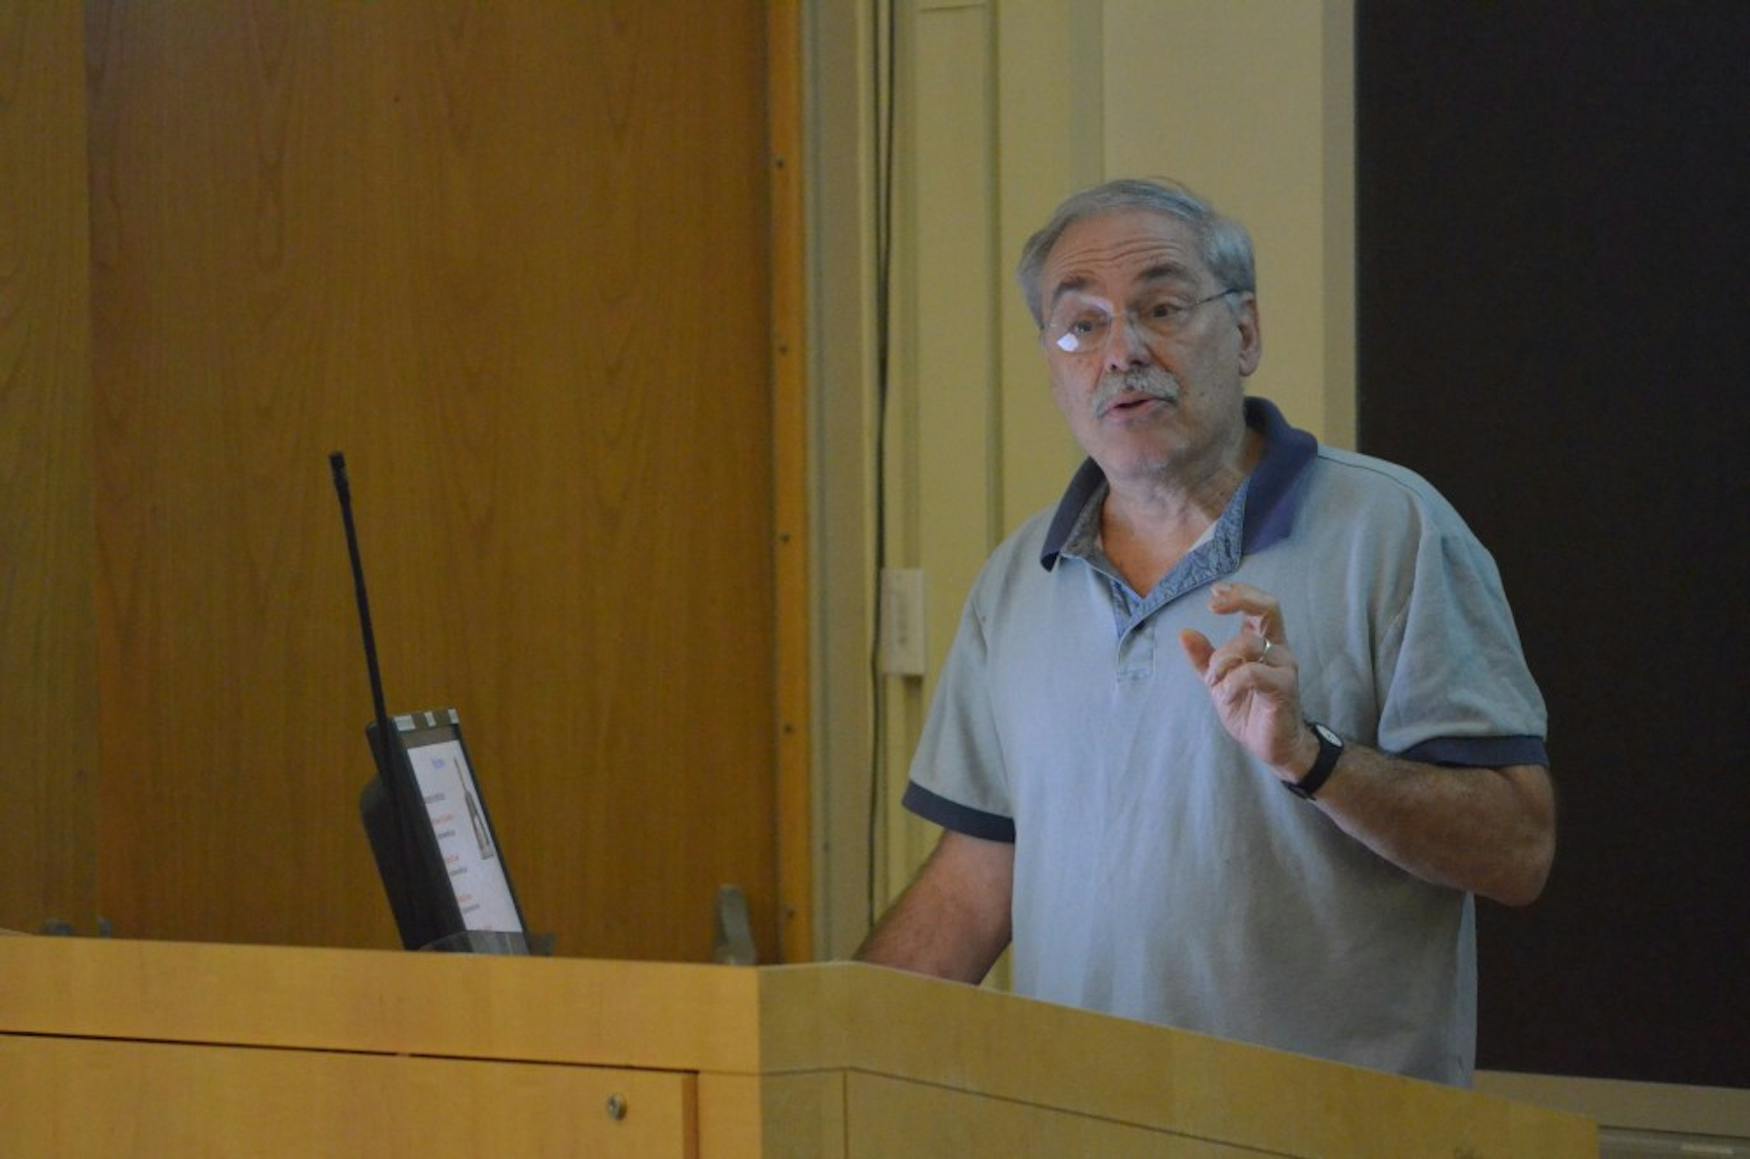 Prof. Chris Miller (BIOL) discussed issues with scientists who do not let go of theories after they are disproved.